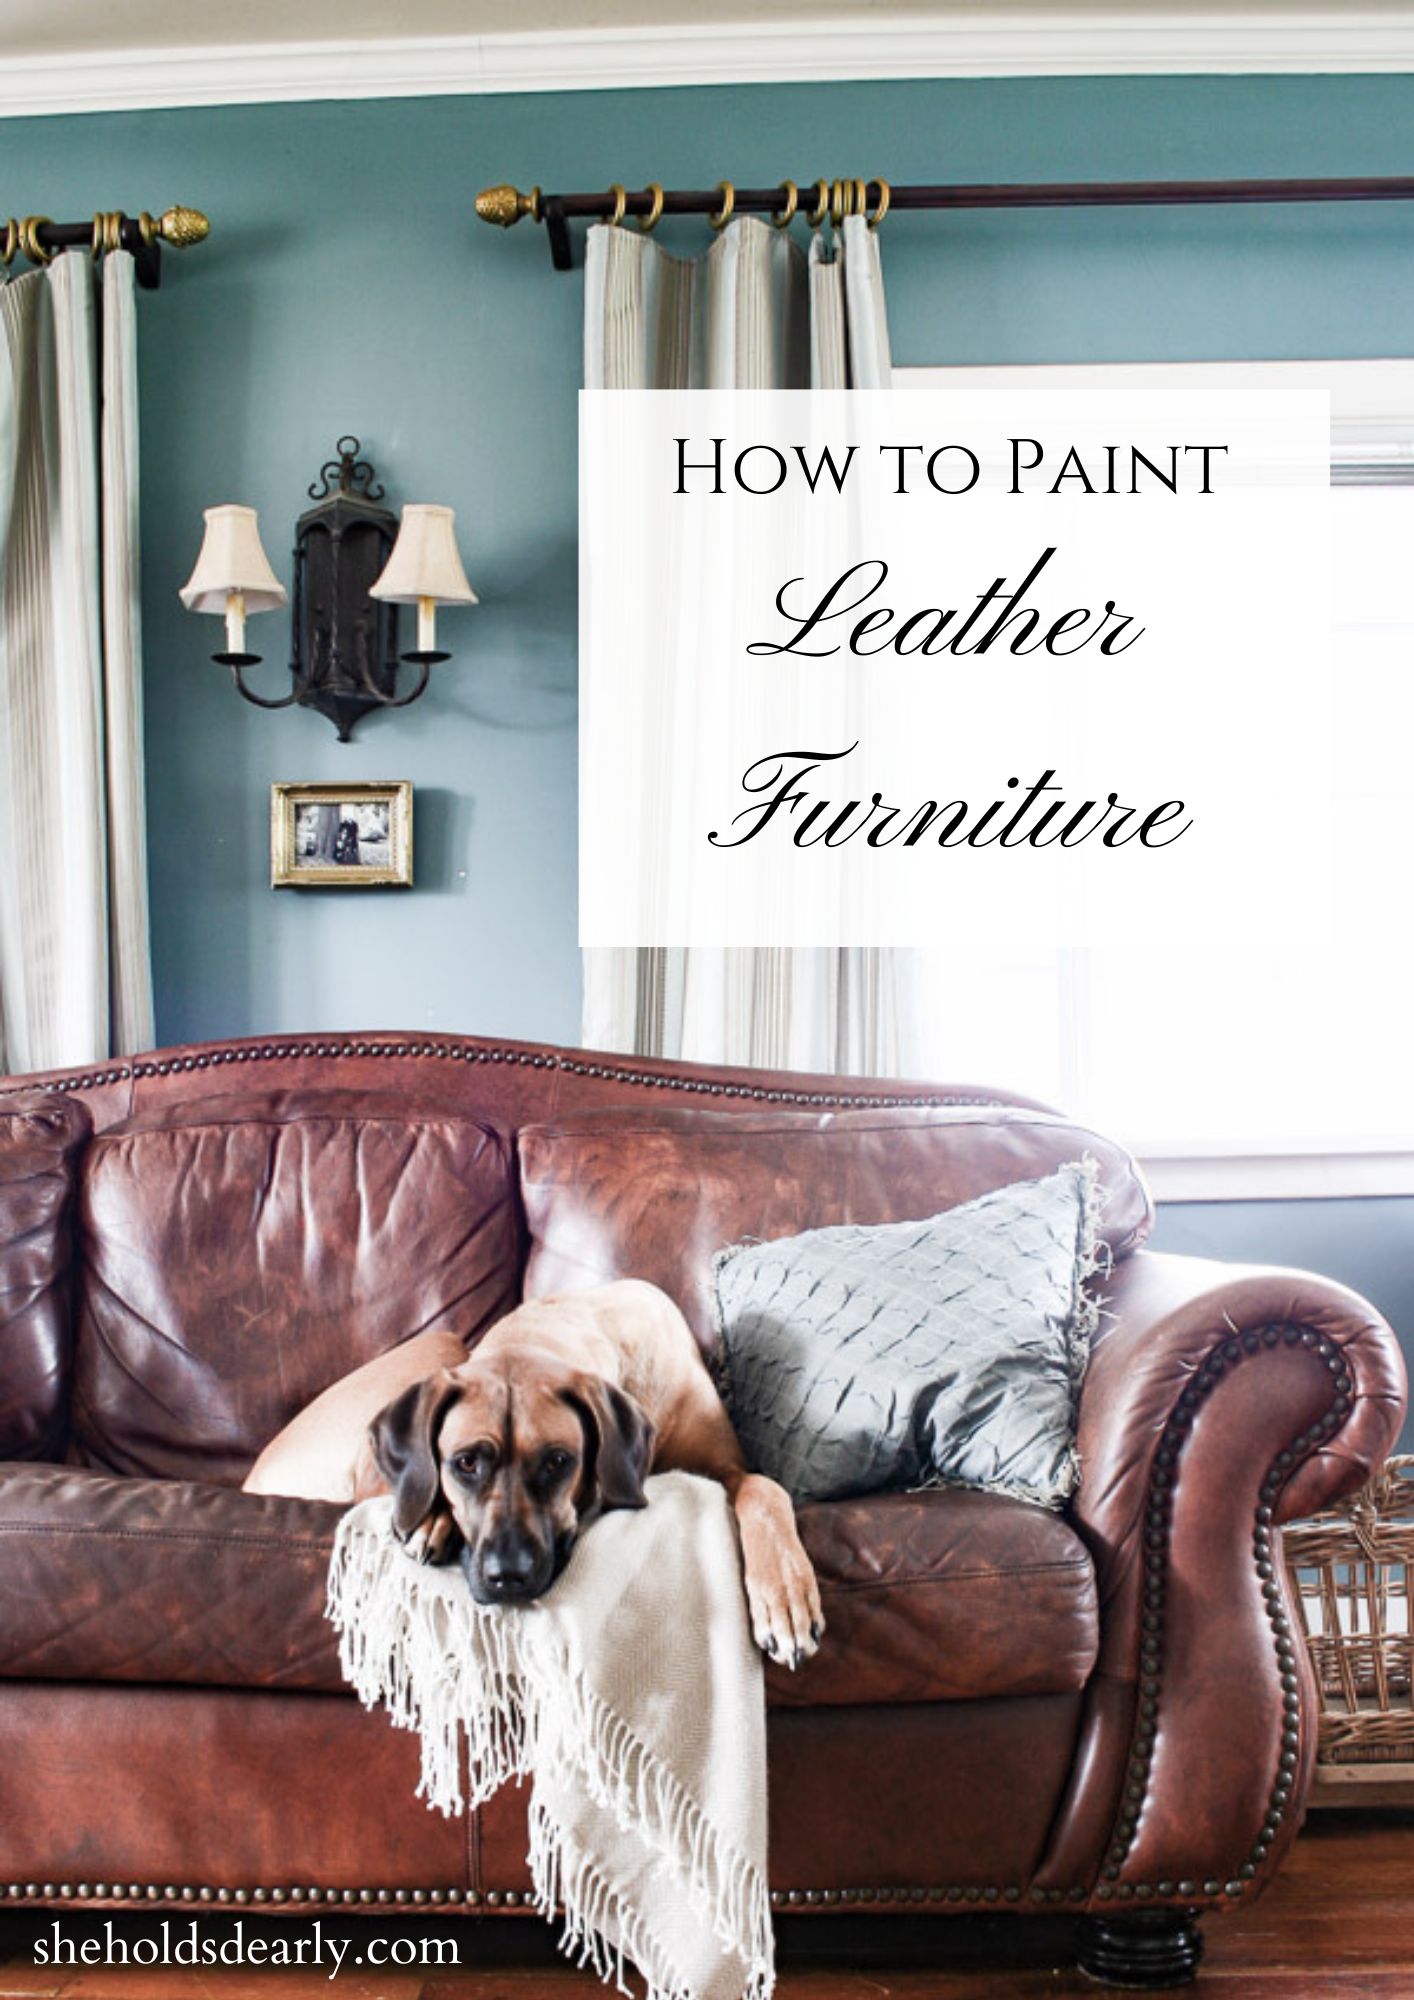 Can You Paint a Leather Sofa? Leather Furniture Paint How-Tos